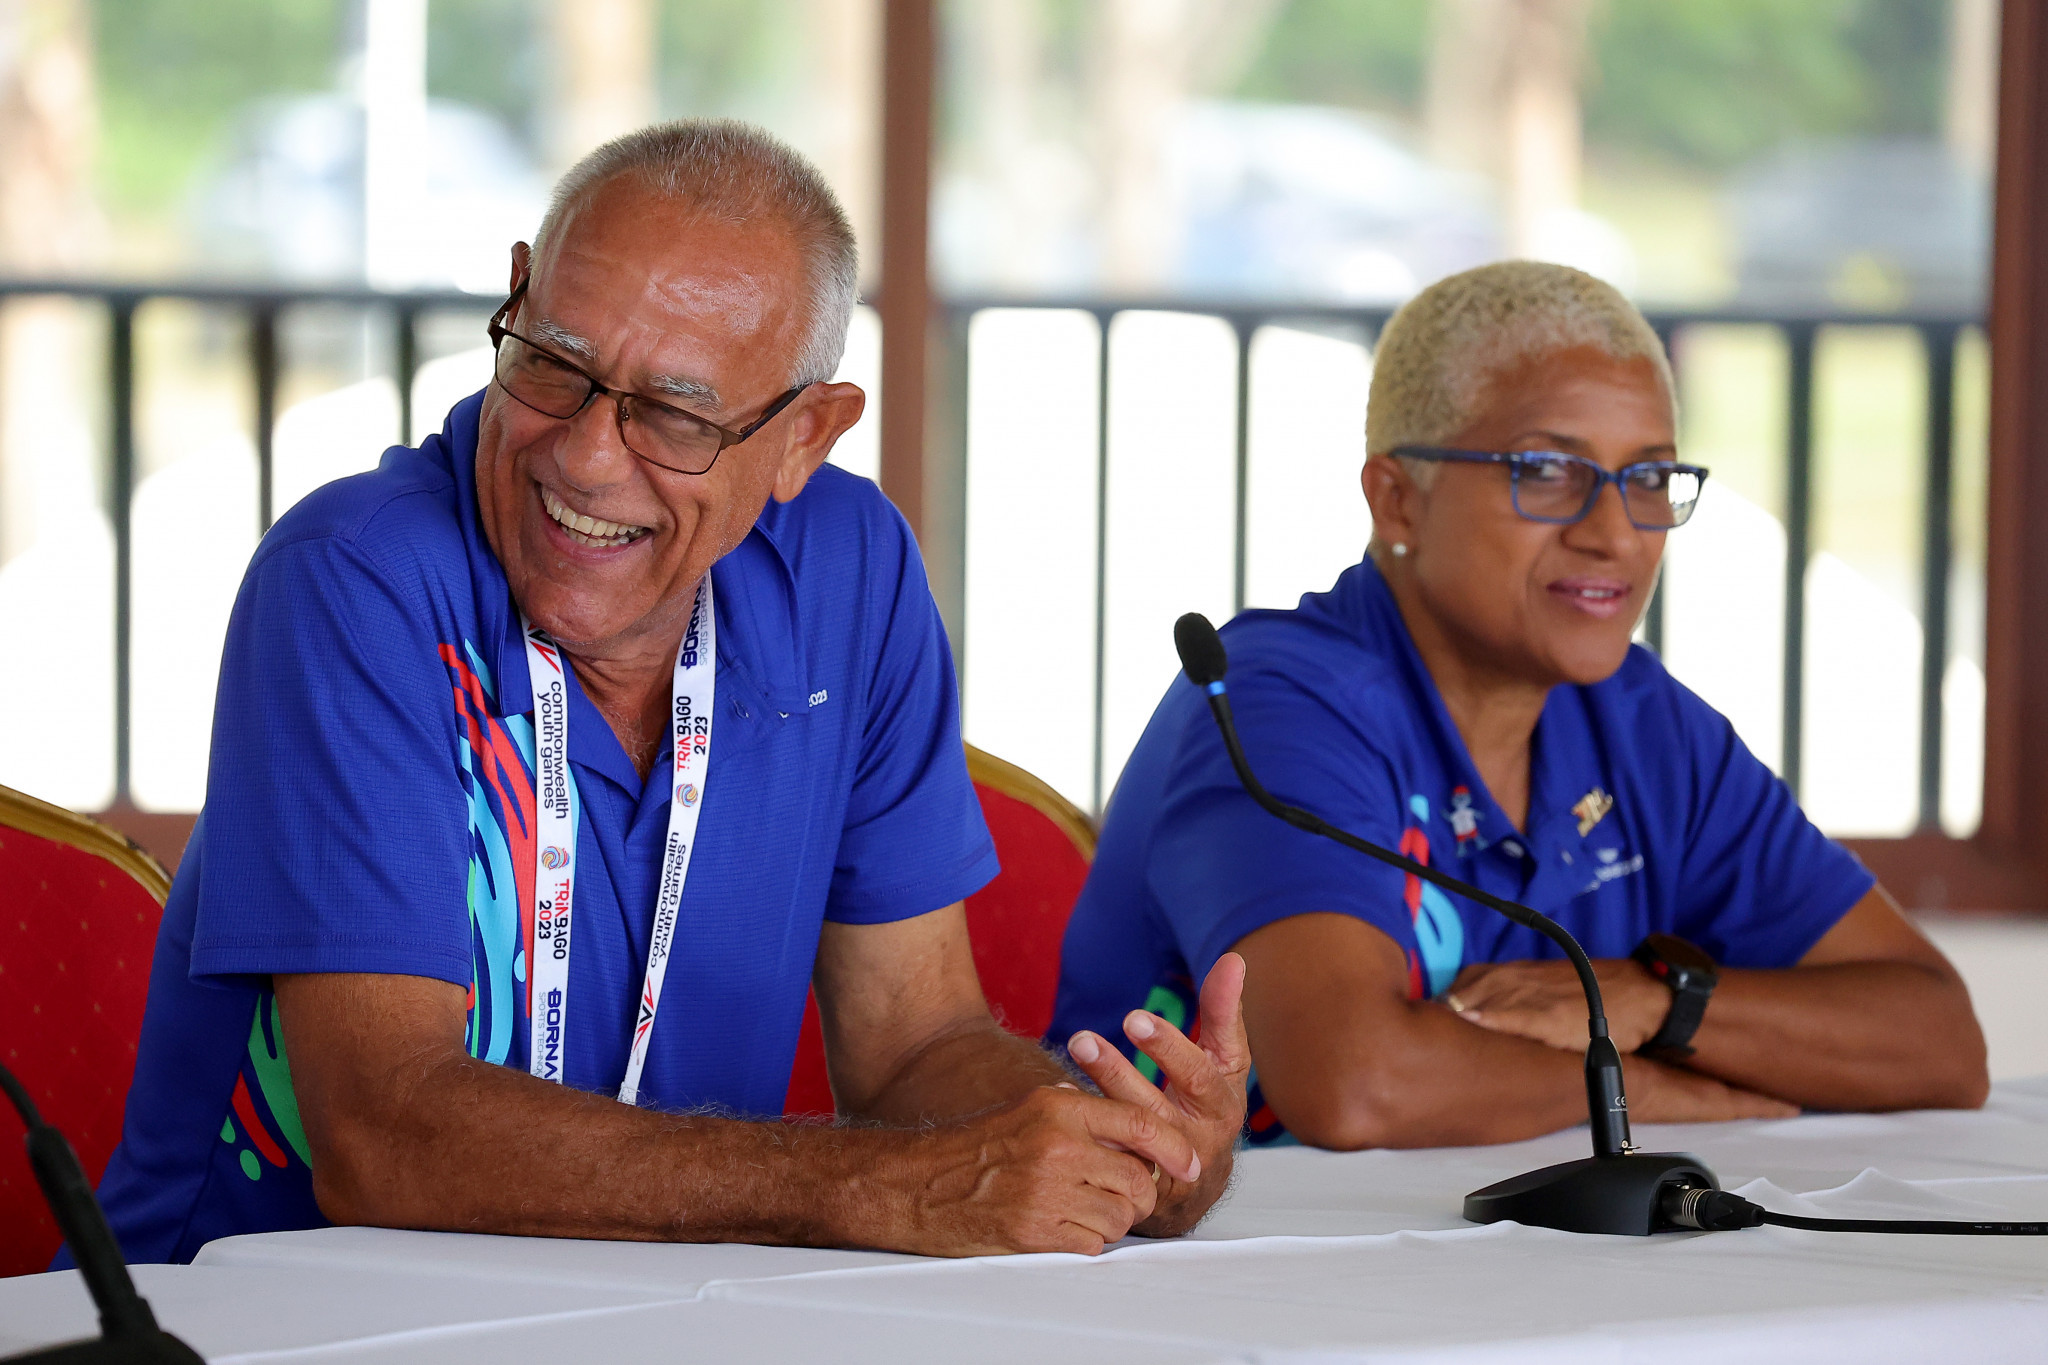 Trinbago 2023 Organising Committee chair Douglas Camacho, left, said "even out harshest critics have given us a very good passing grade" ©Getty Images